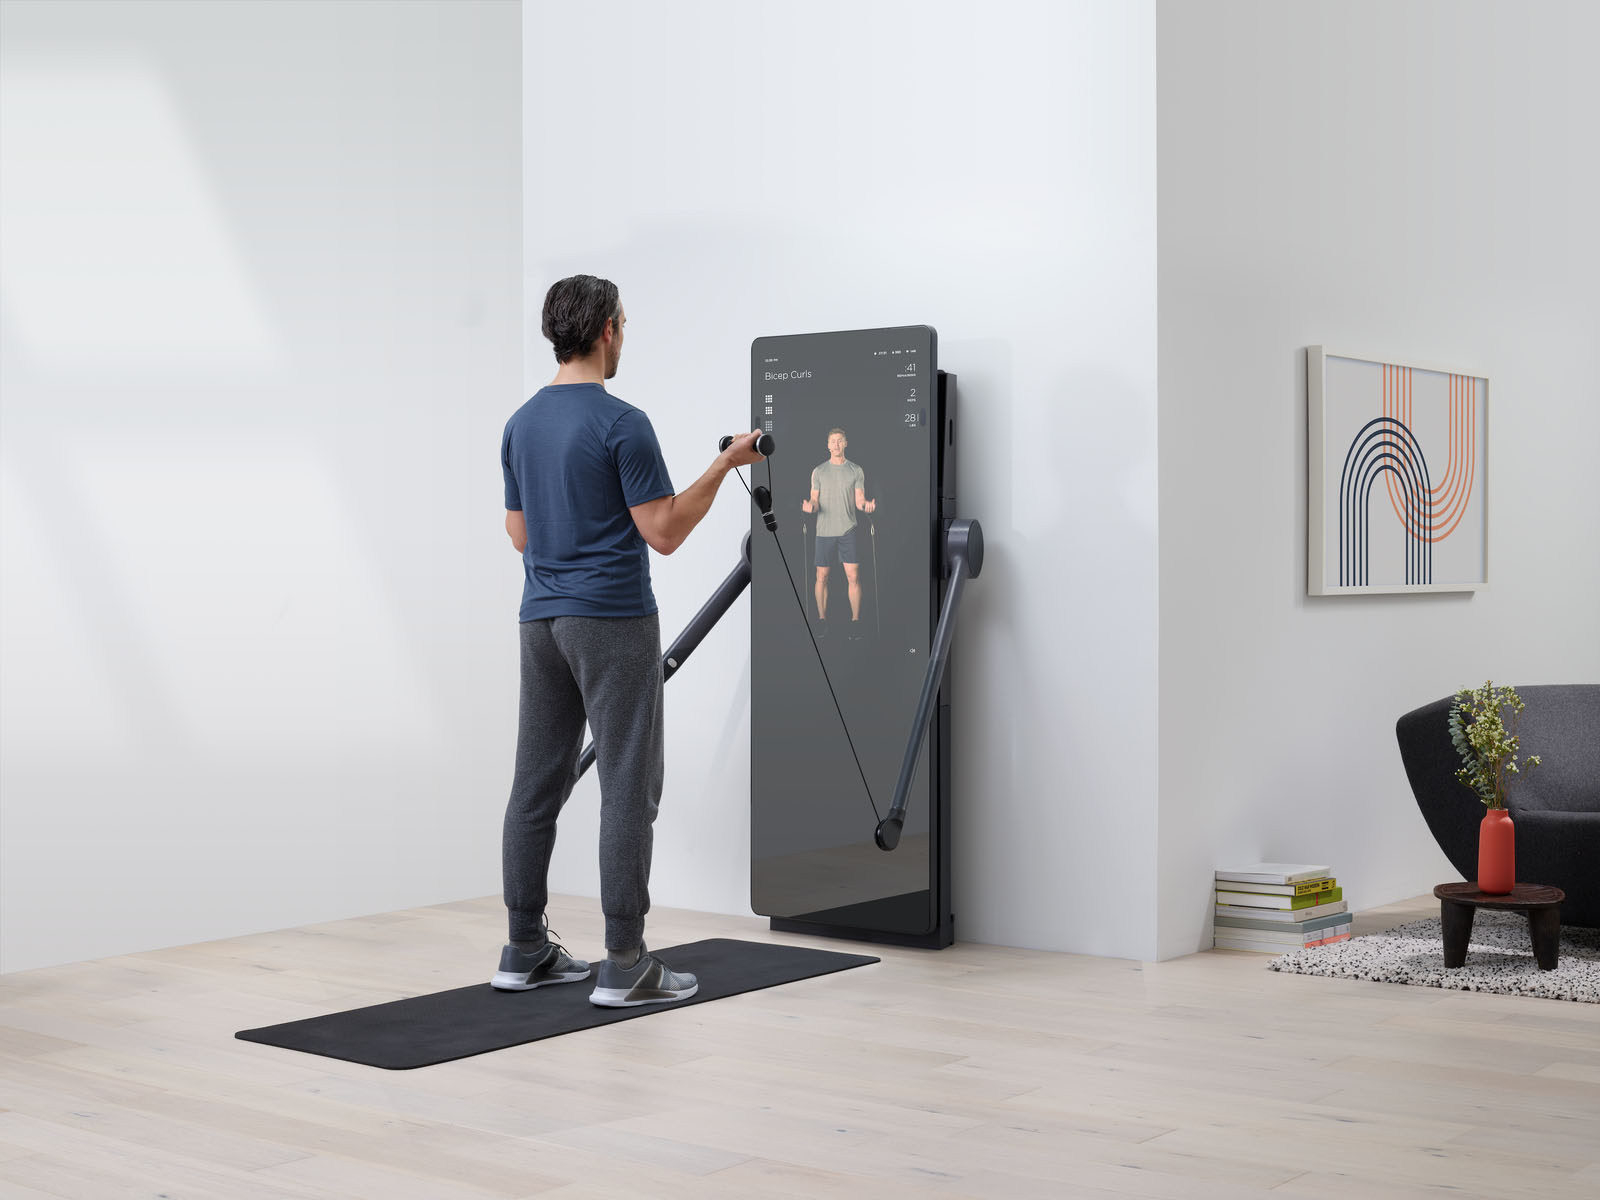 Forme Fitness Mirror Uses AI, Live Trainers for At-Home Workouts